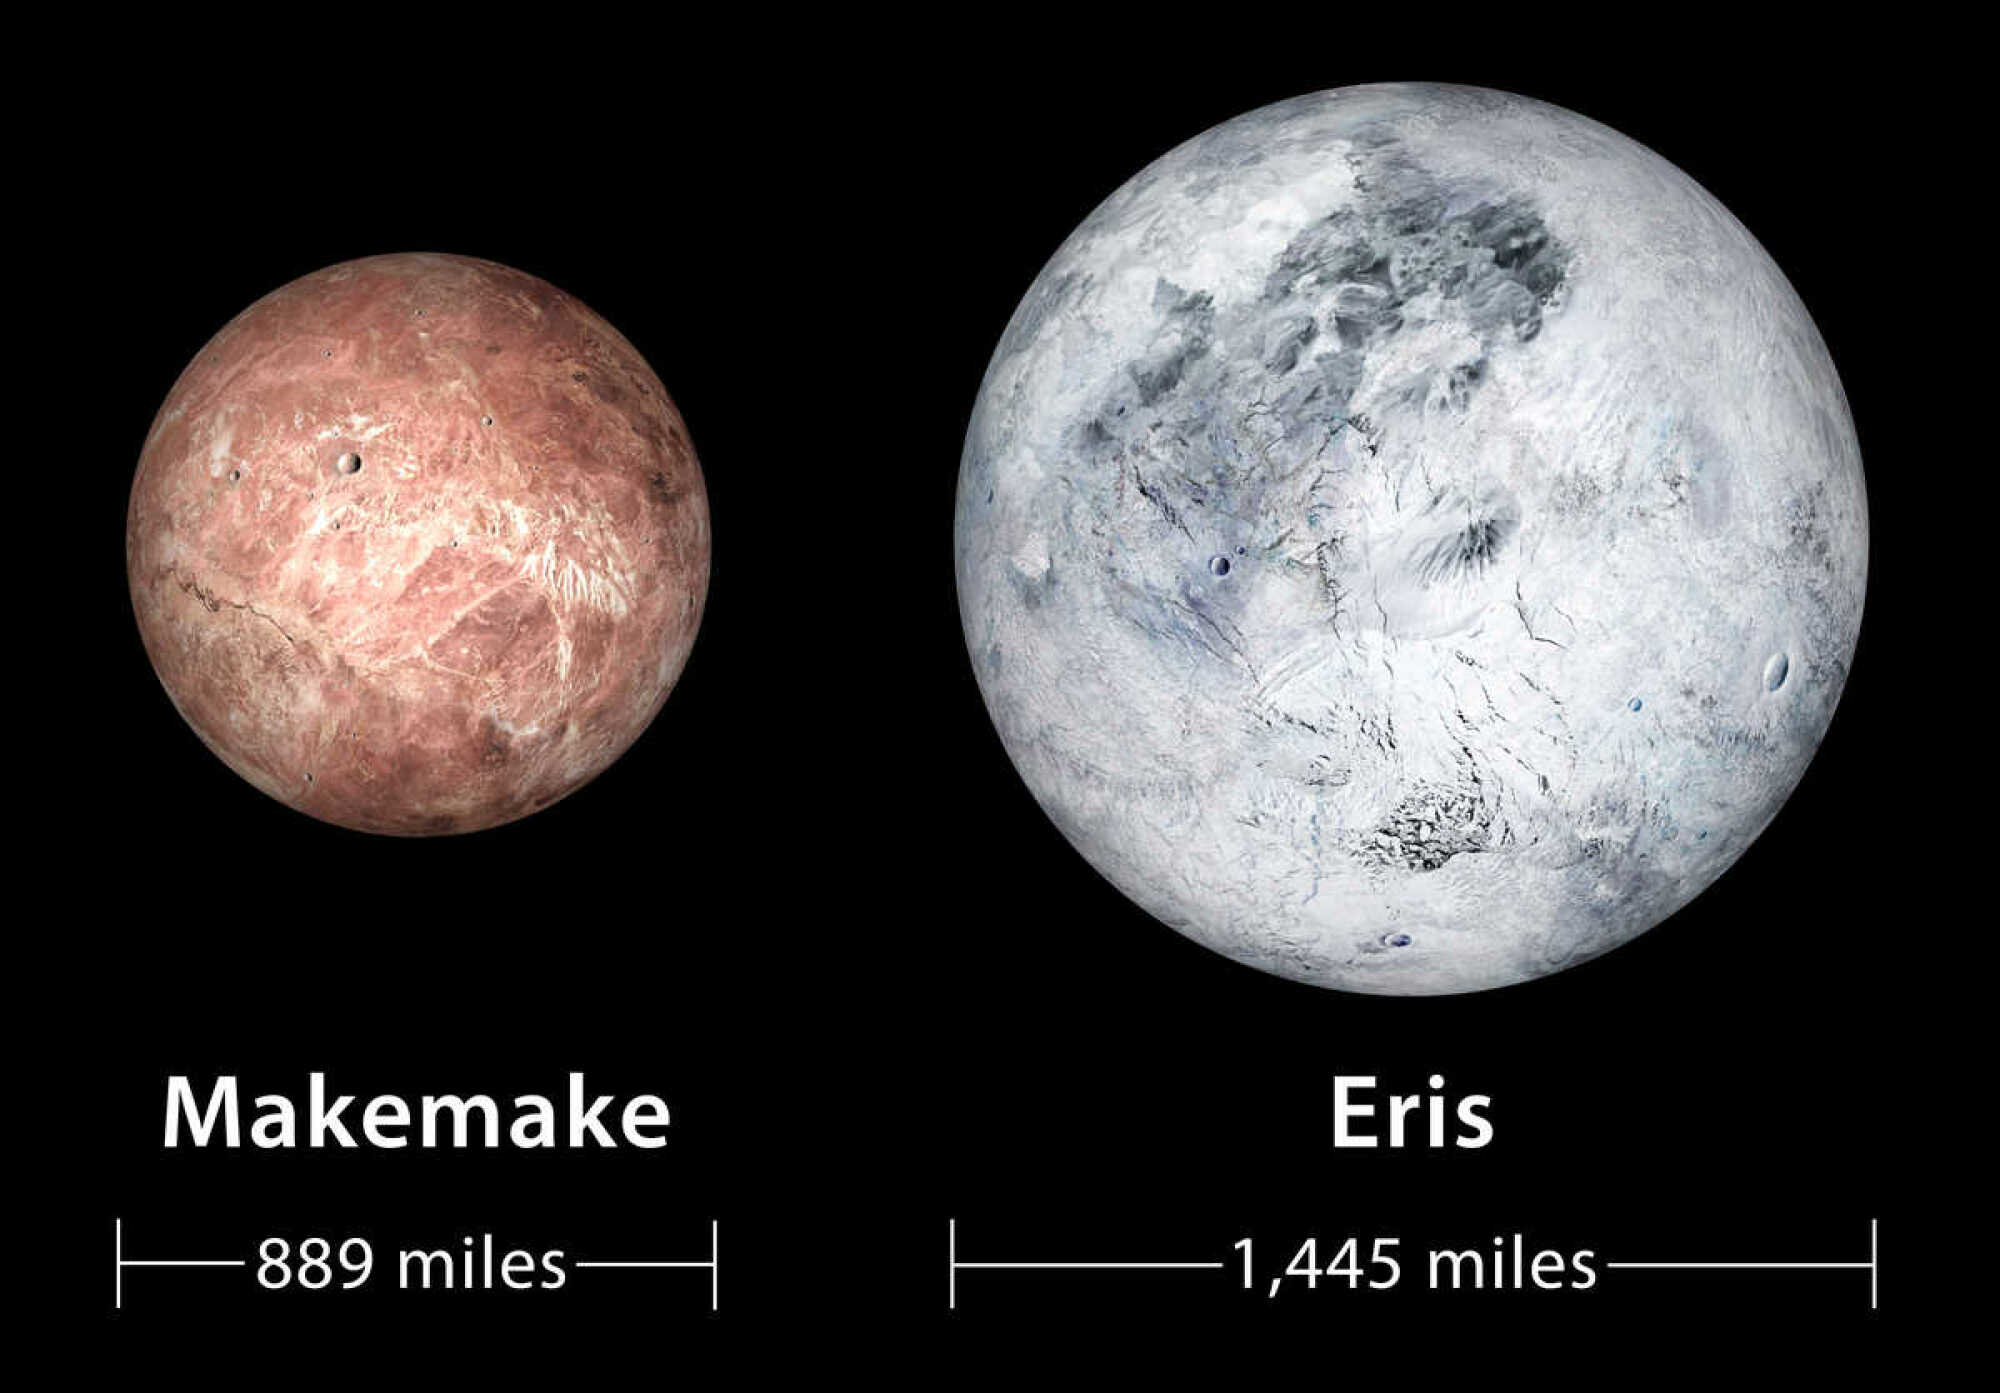 A conception of what the two dwarf planets Eris and Makemake look like.